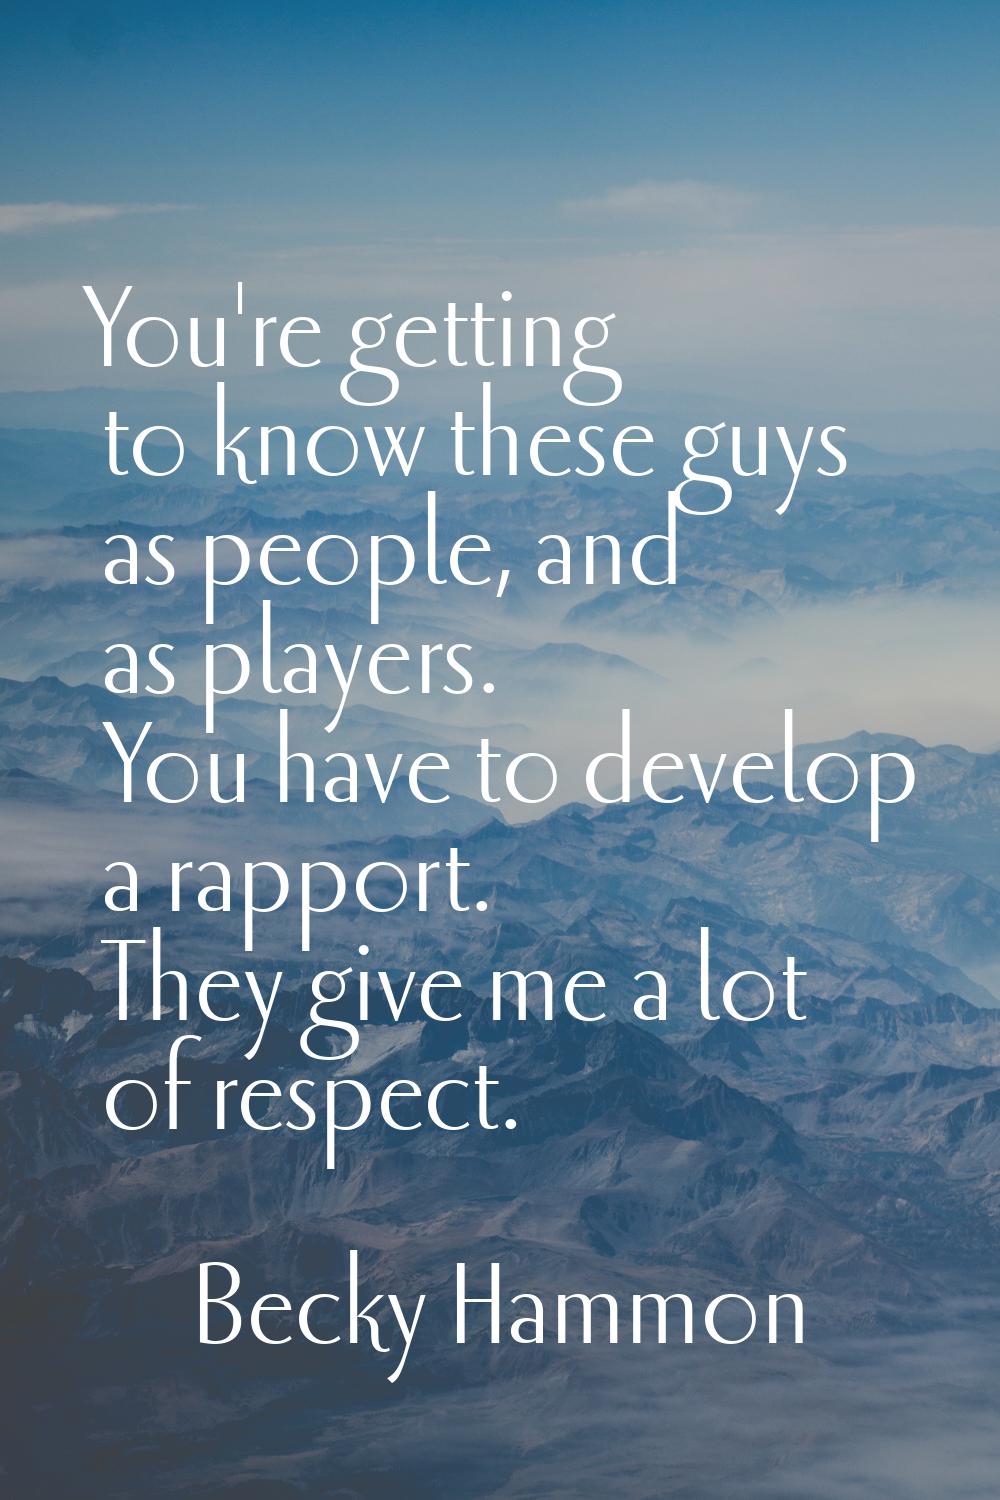 You're getting to know these guys as people, and as players. You have to develop a rapport. They gi